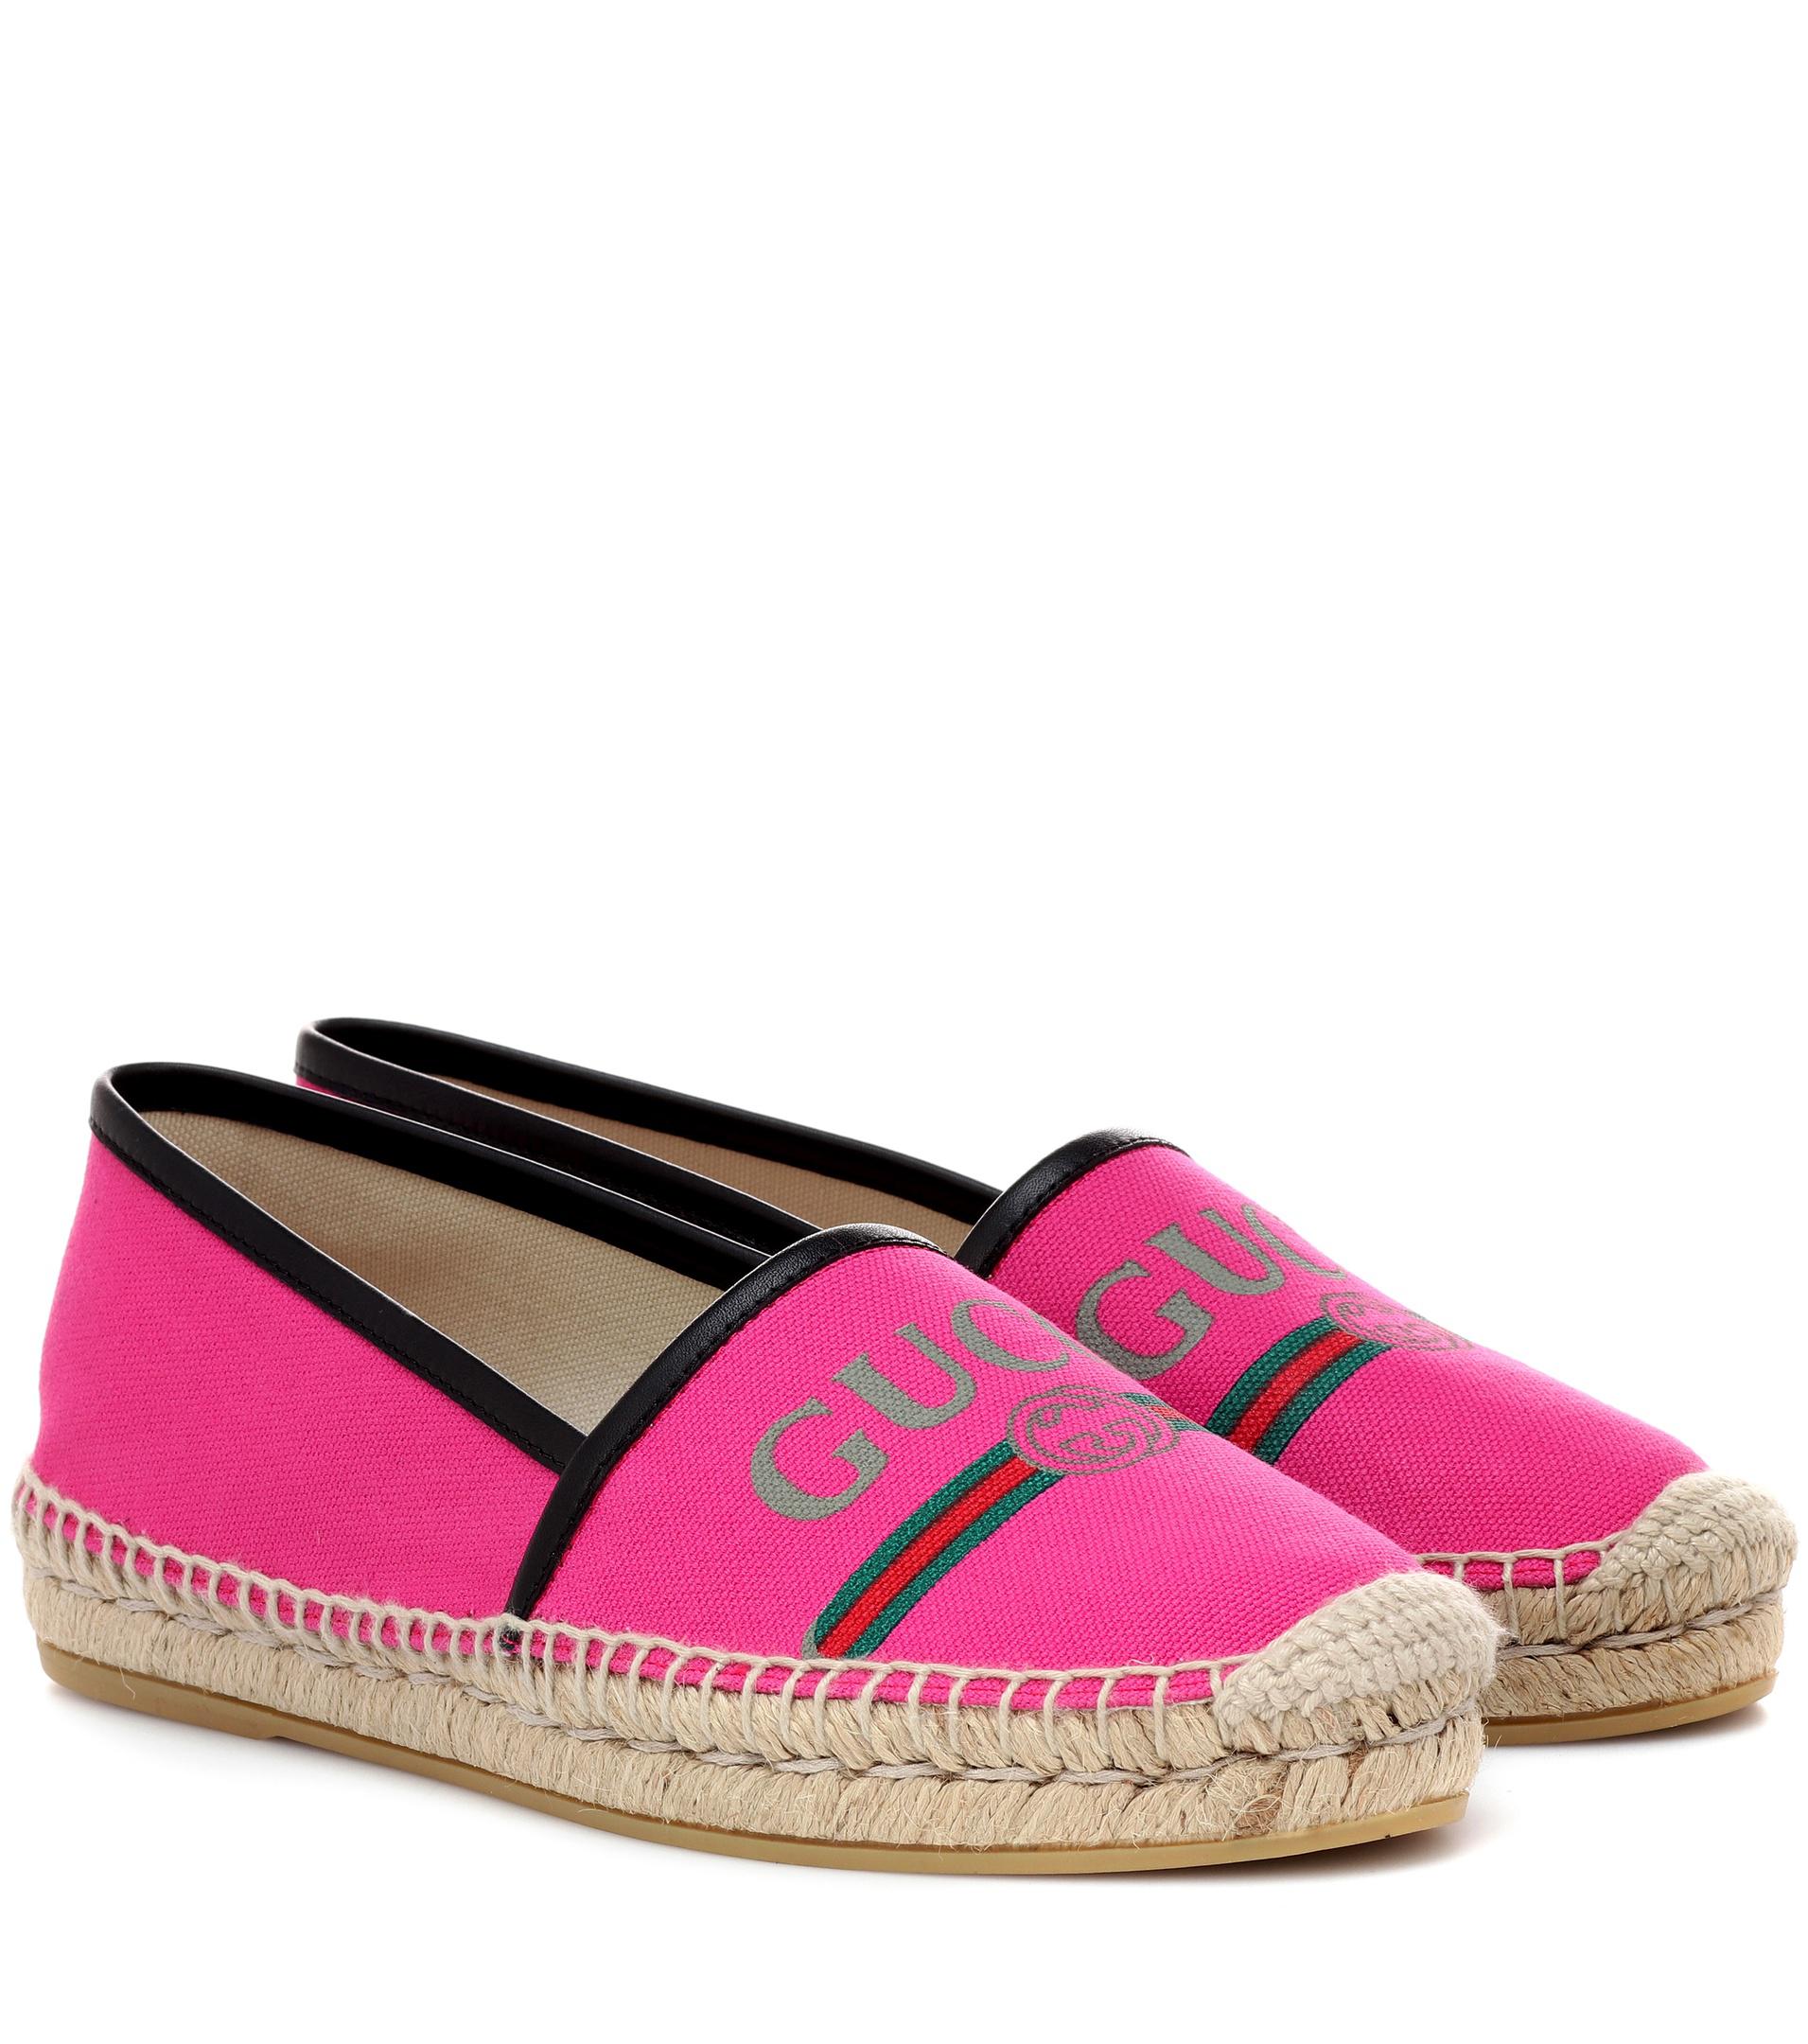 Gucci Rubber Logo Espadrilles in Pink - Lyst